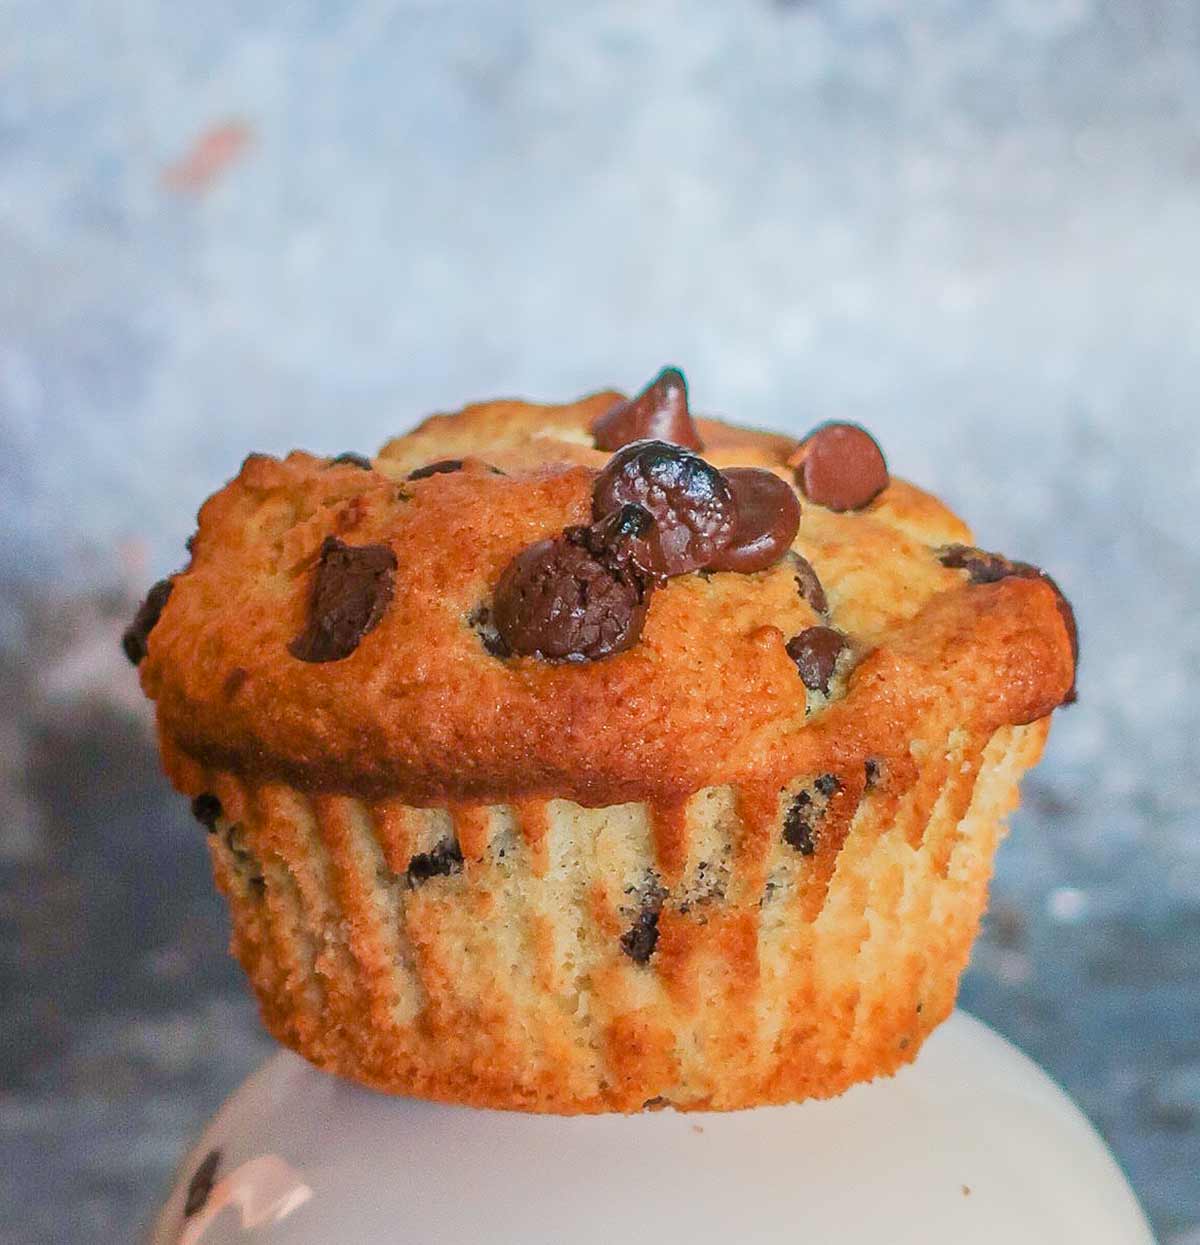 gluten free French chocolate chip muffin bakery style